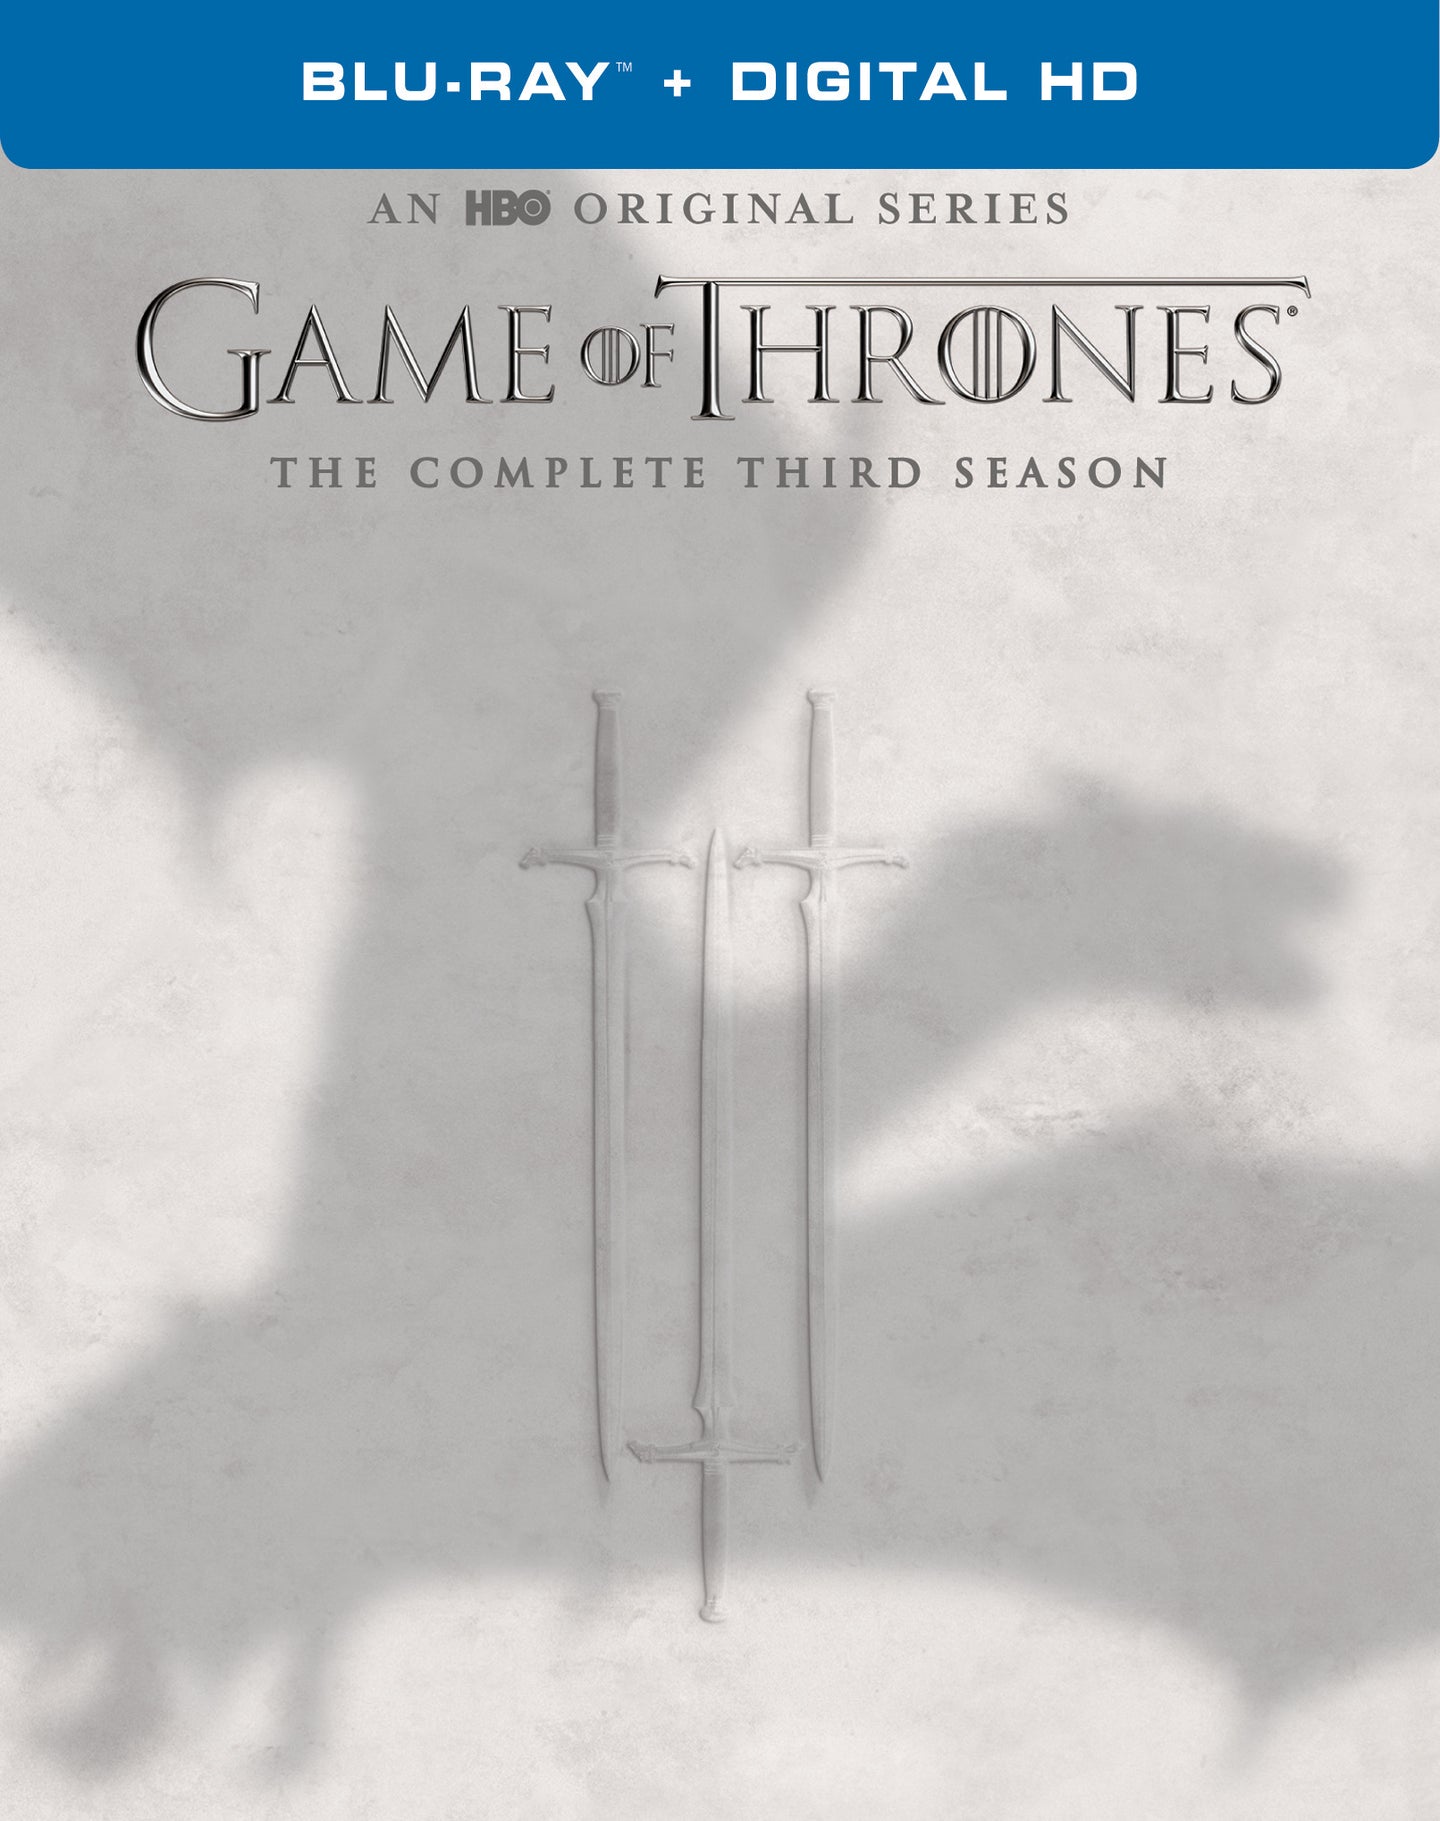 Game of Thrones: The Complete Third Season (2013) iTunes HD redemption only